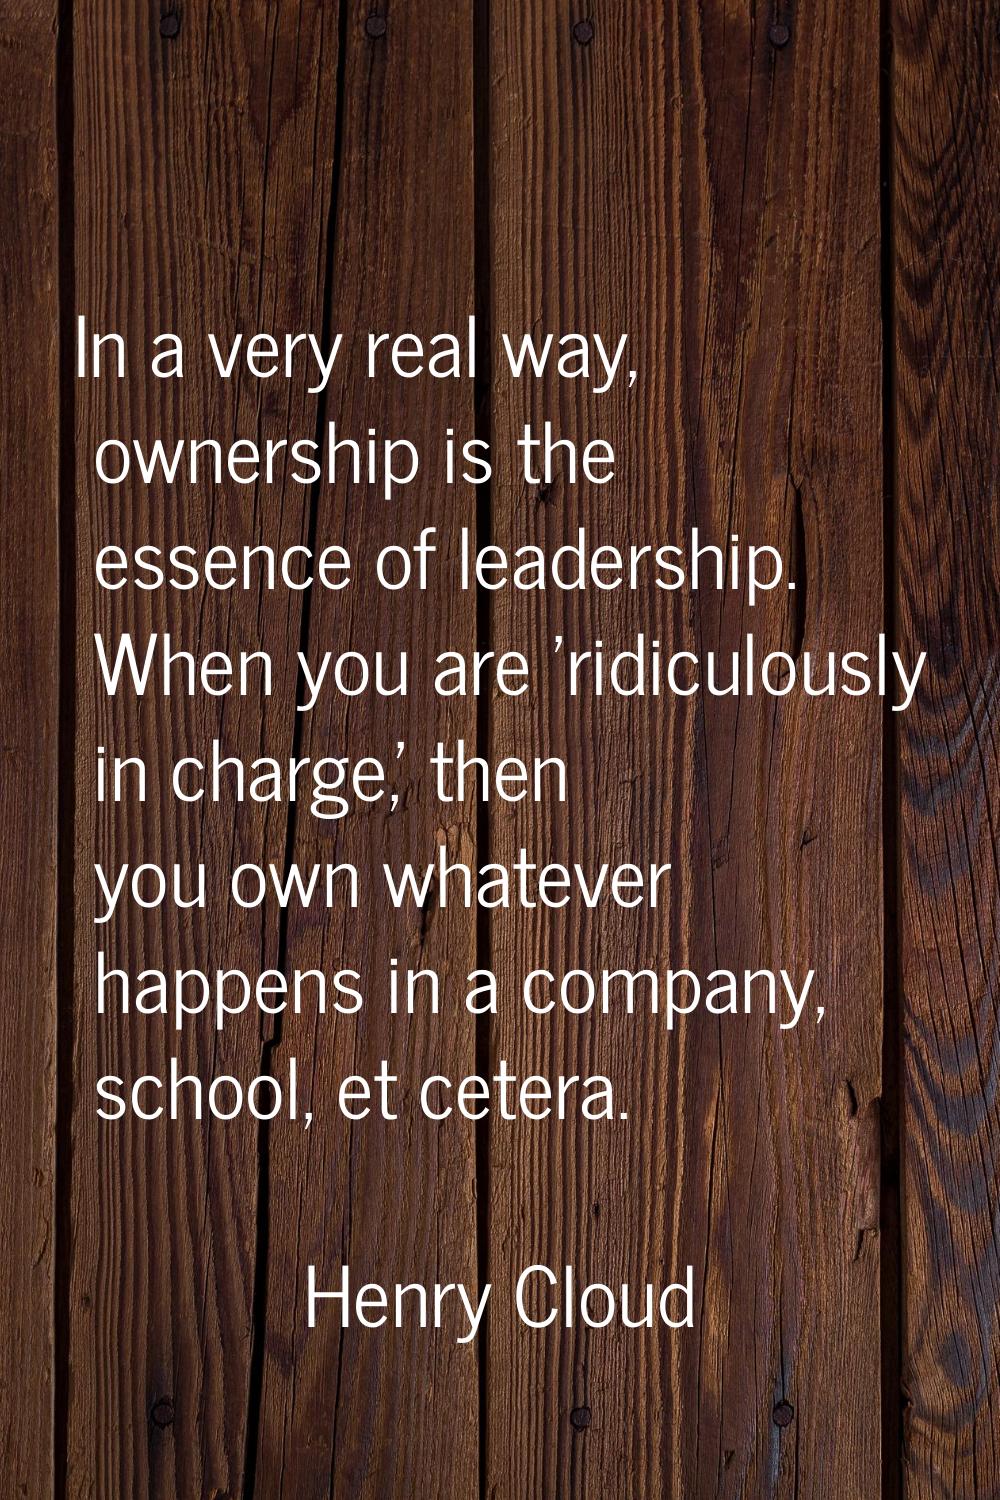 In a very real way, ownership is the essence of leadership. When you are 'ridiculously in charge,' 